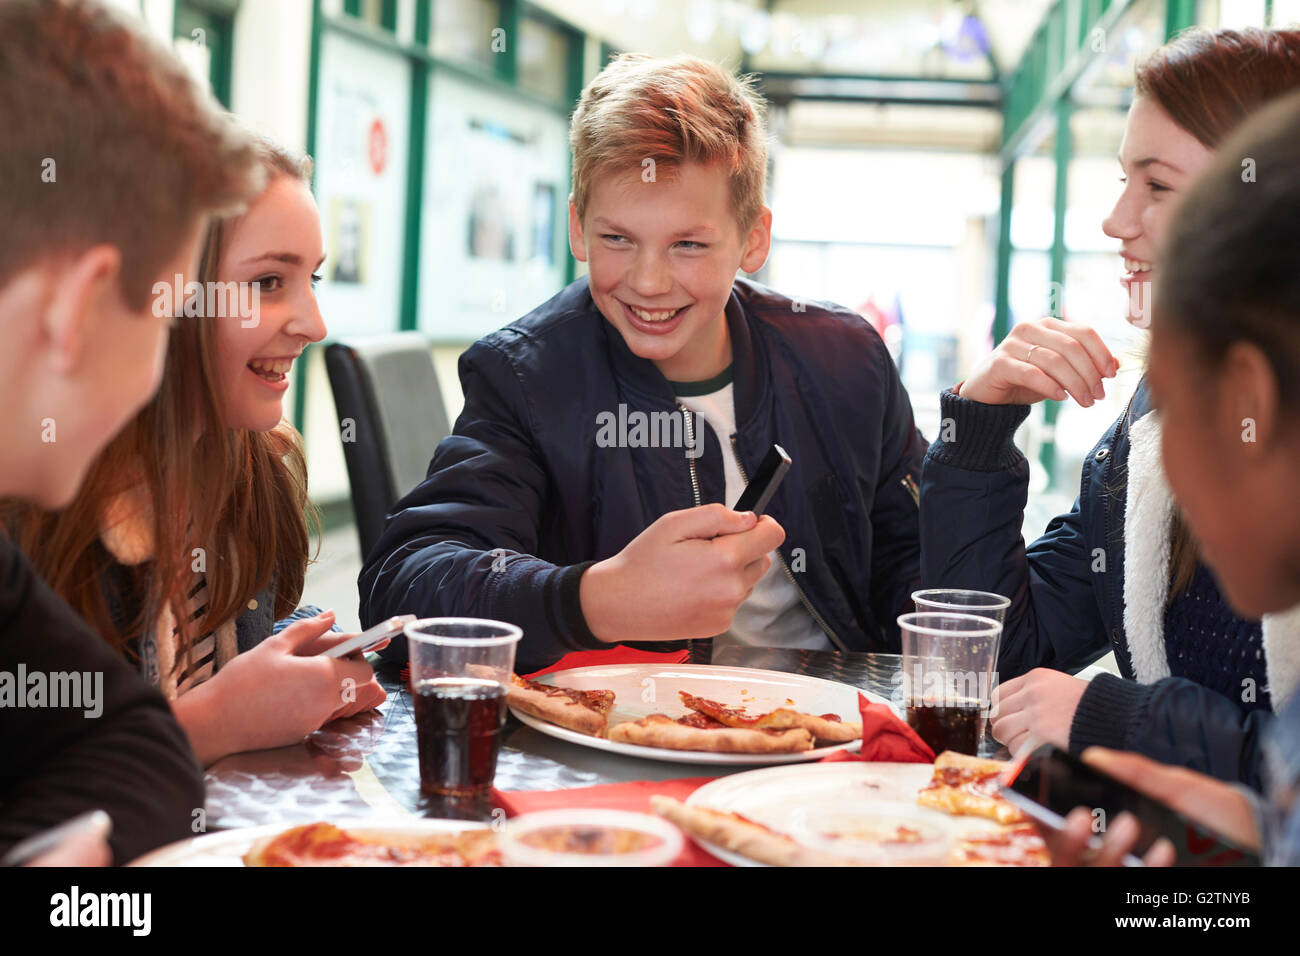 Teenagers Eating Pizza In Cafe And Looking At Mobile Phone Stock Photo